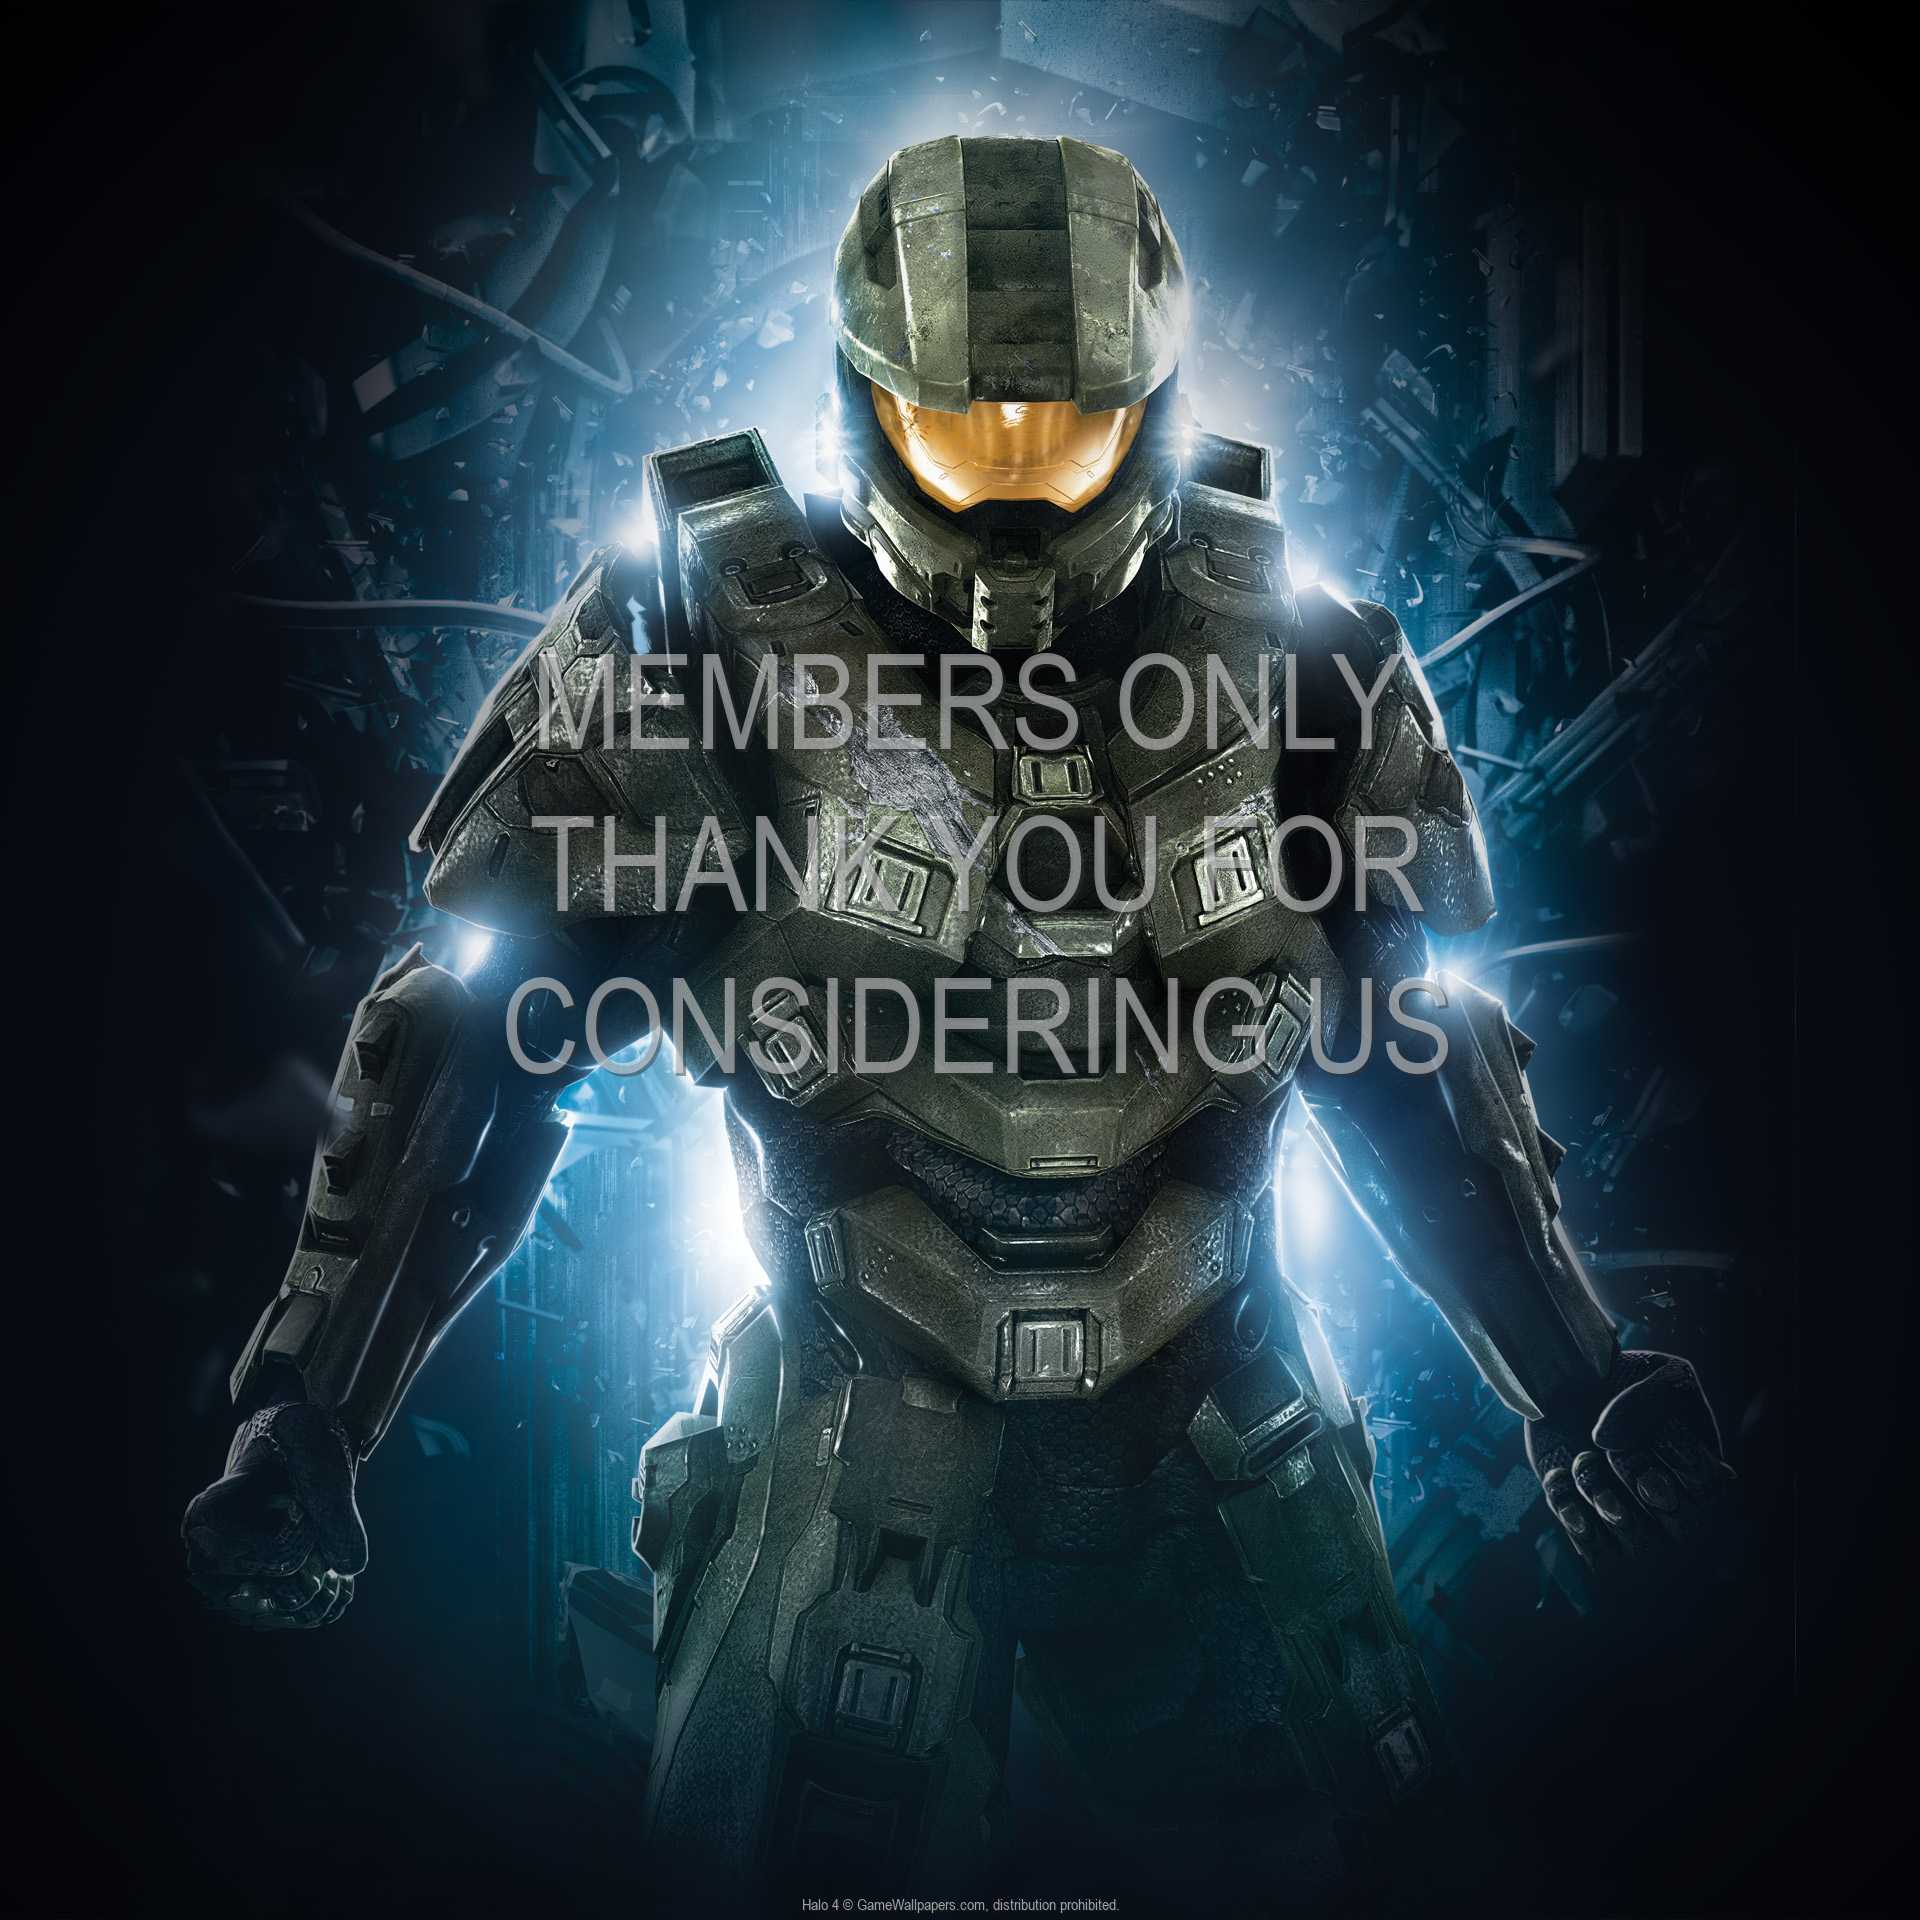 Halo 4 1080p Horizontal Mobile wallpaper or background 04